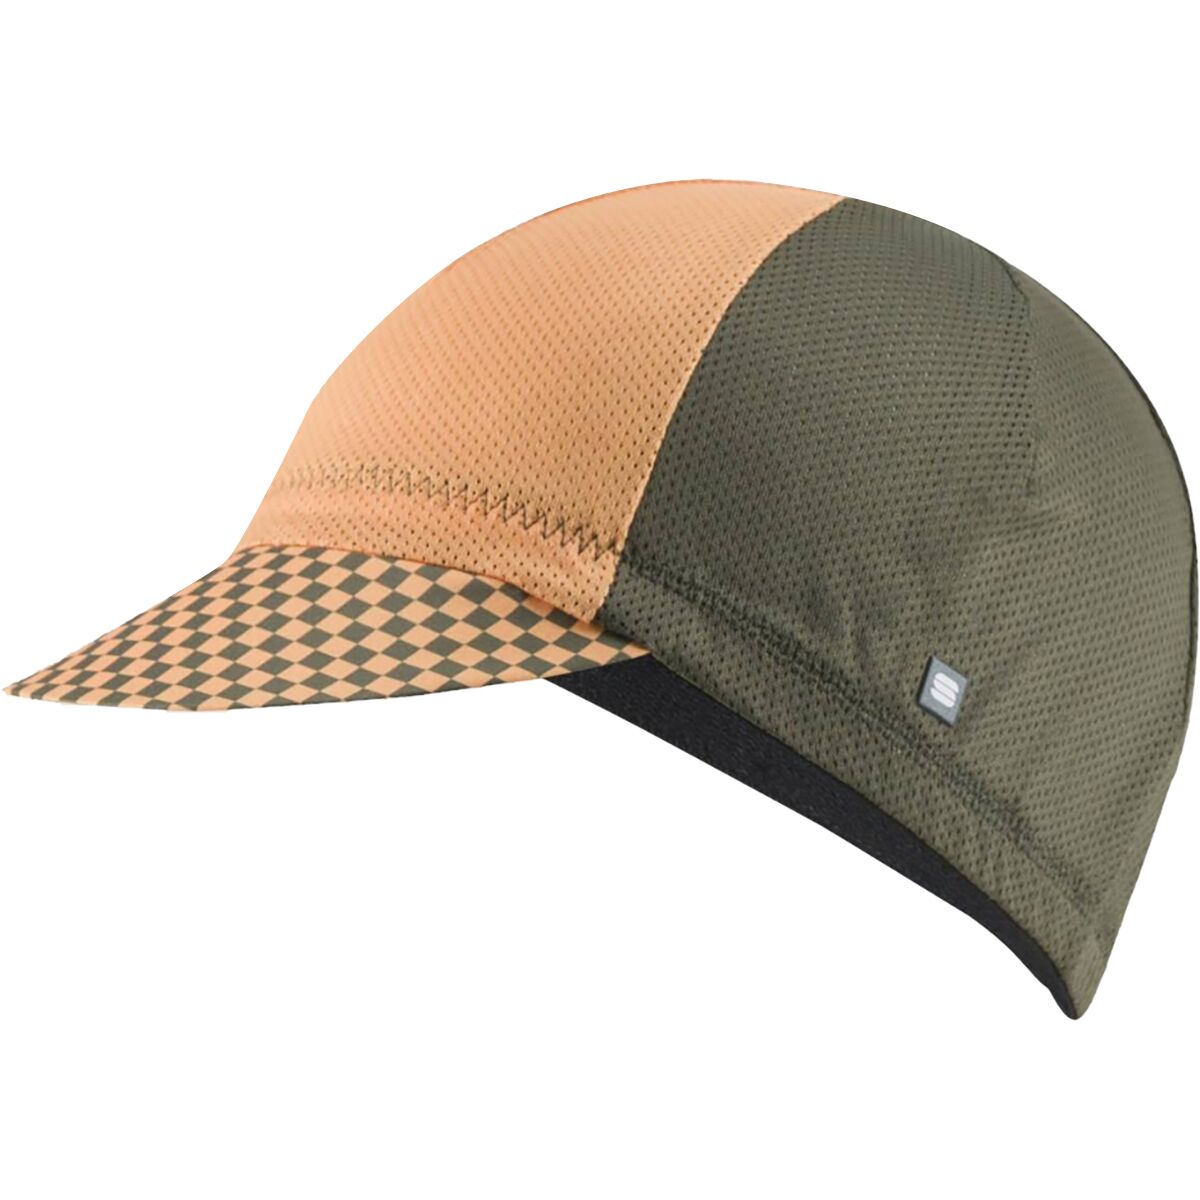 Sportful Checkmate Cycling Cap Beetle, One Size